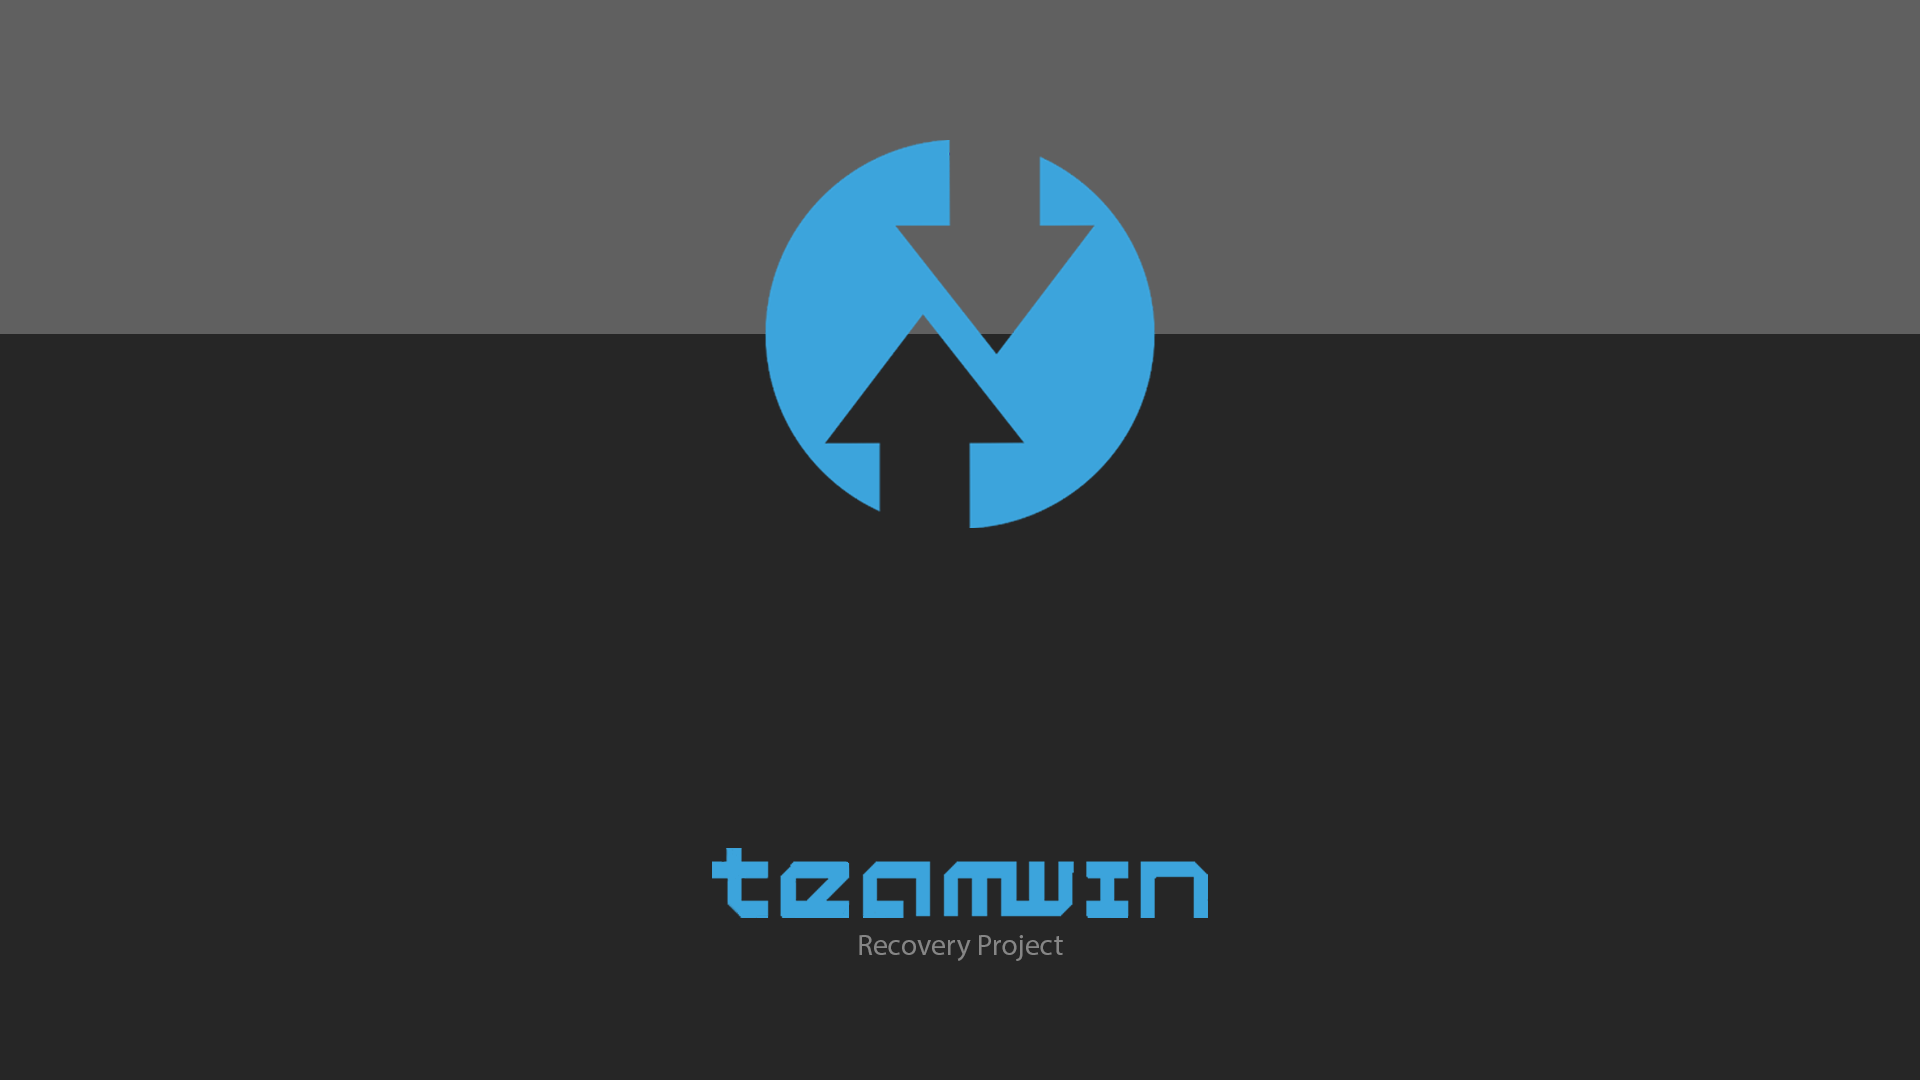 TeamWin Recovery Project logo